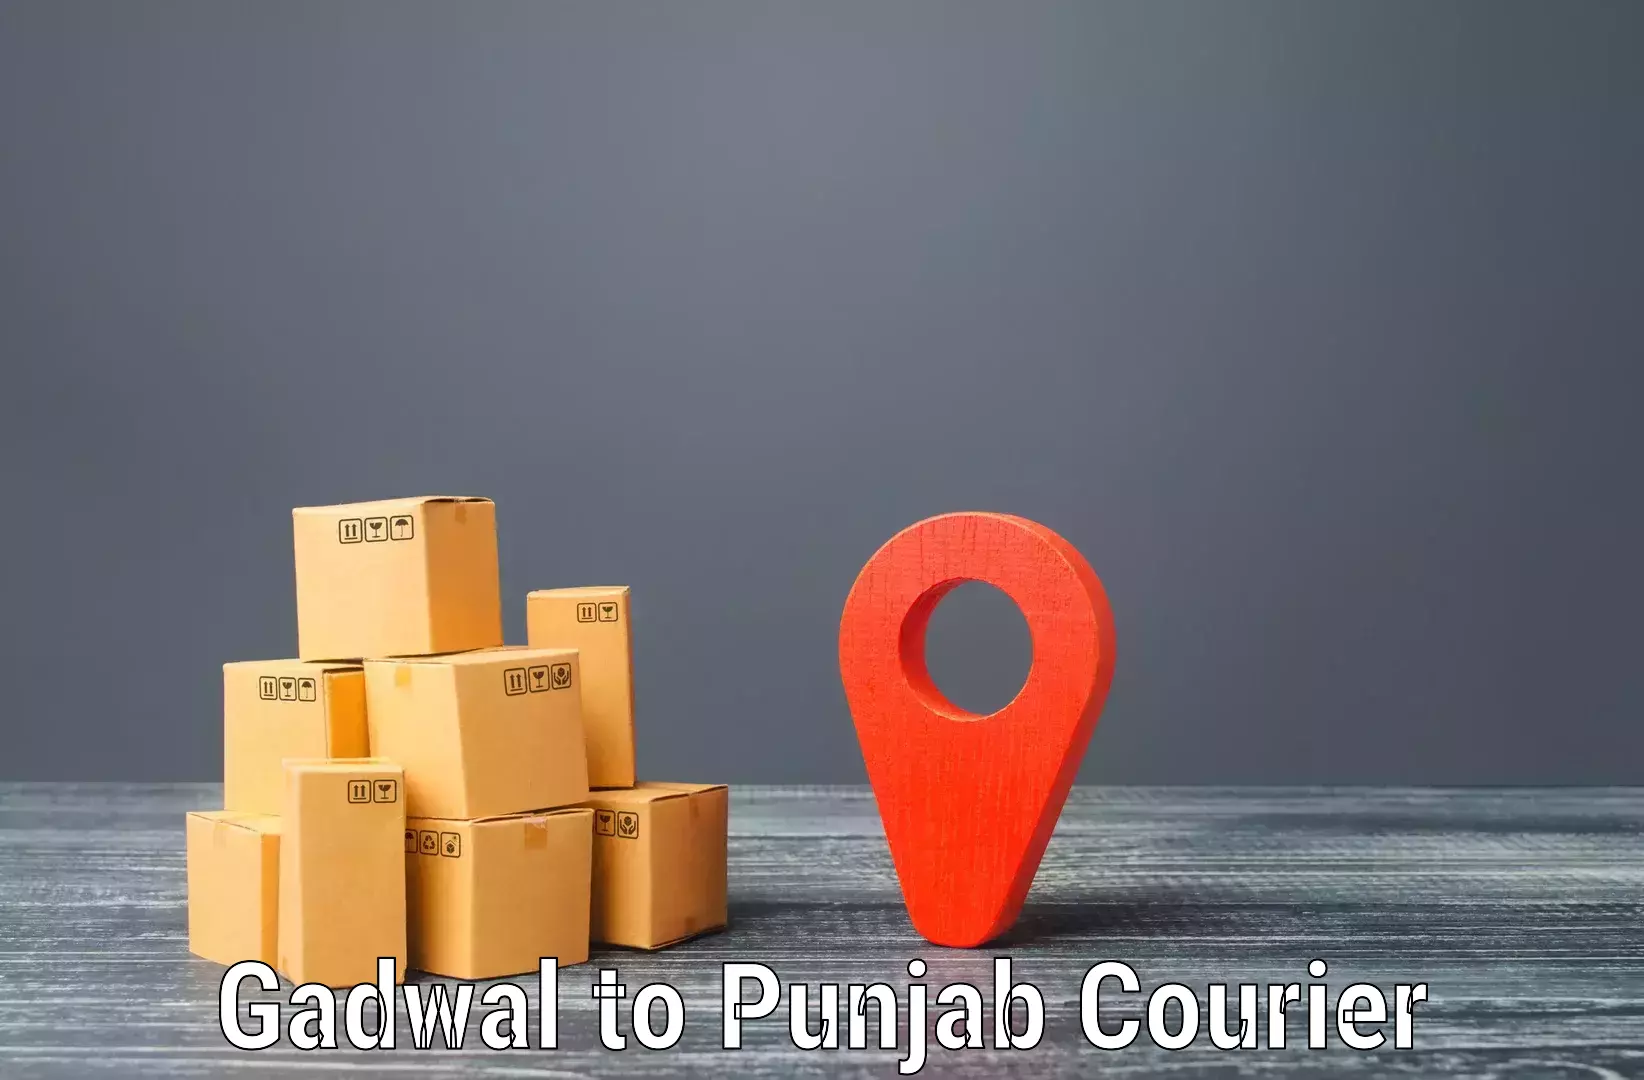 Trackable shipping service Gadwal to Patiala